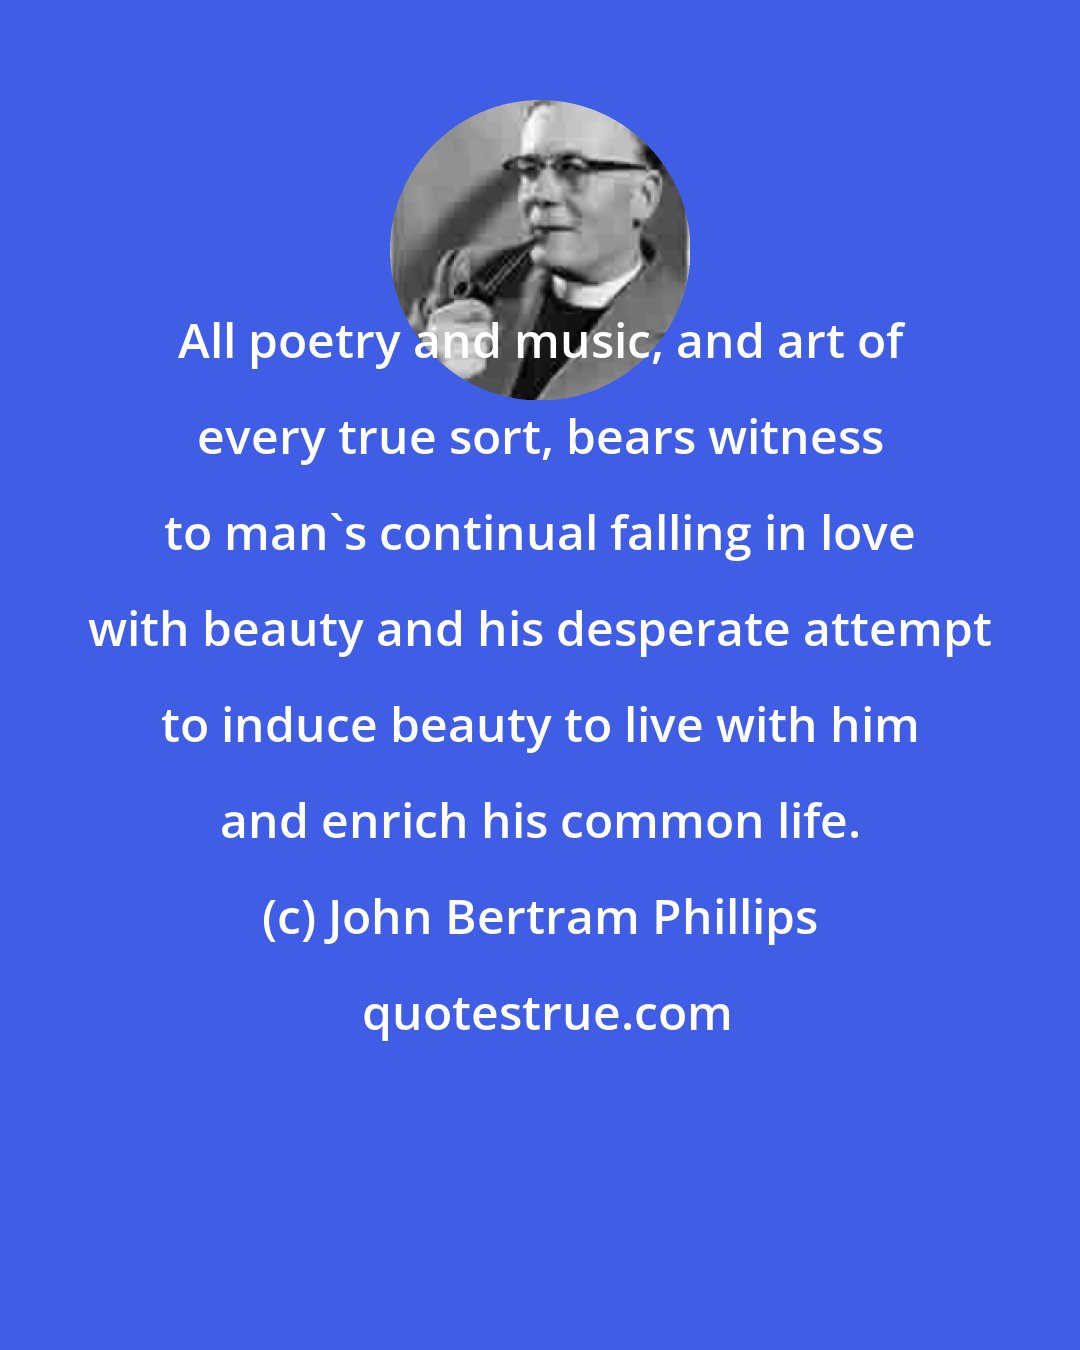 John Bertram Phillips: All poetry and music, and art of every true sort, bears witness to man's continual falling in love with beauty and his desperate attempt to induce beauty to live with him and enrich his common life.